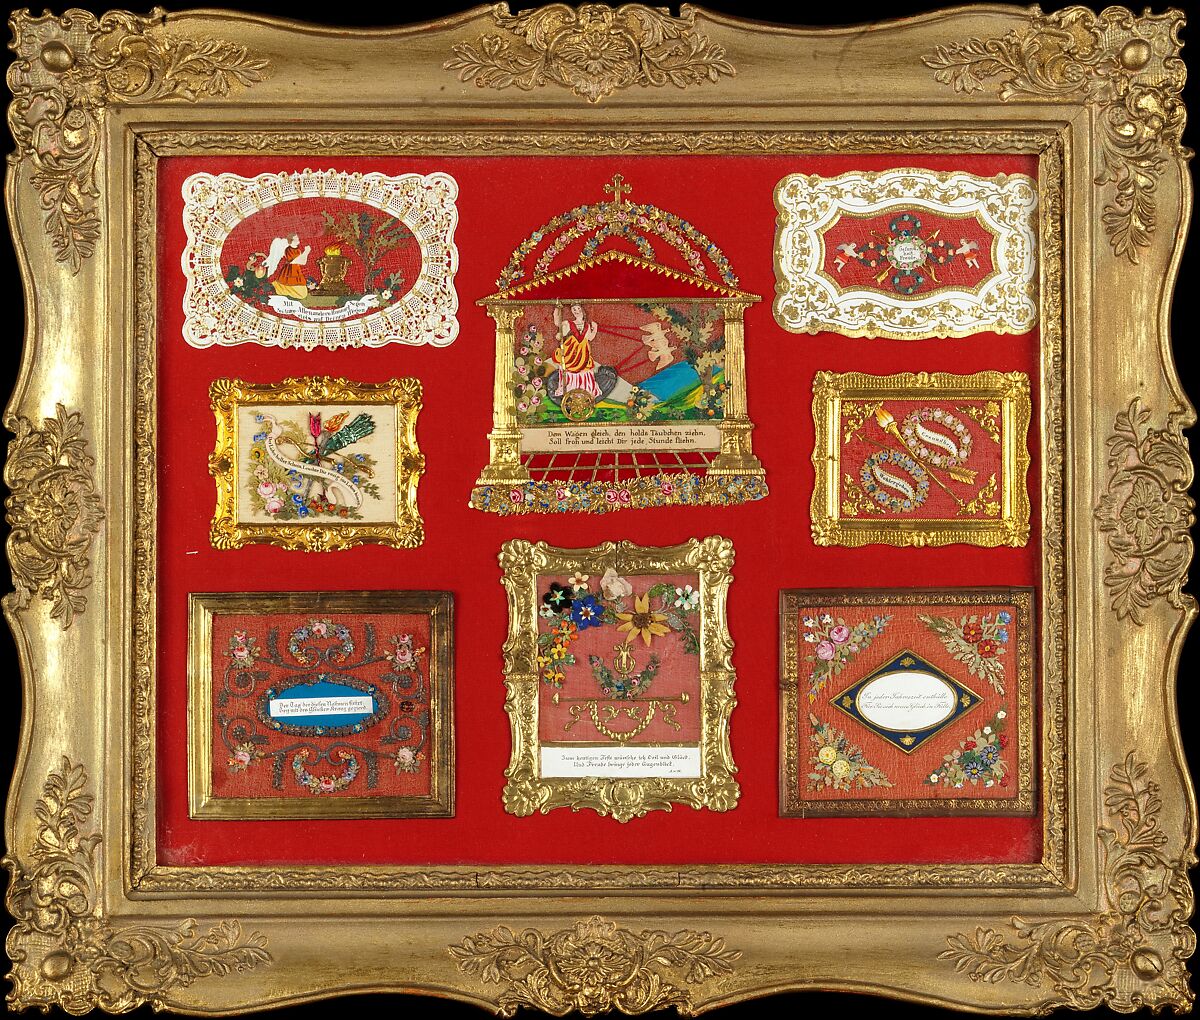 Eight Kunstbillets, Anonymous, Austrian, Viennese, 19th century, Gouache on card, cut and embossed paper with printed or inscribed mottoes, silk gauze, gilded paper borders, all mounted on red silk, framed 